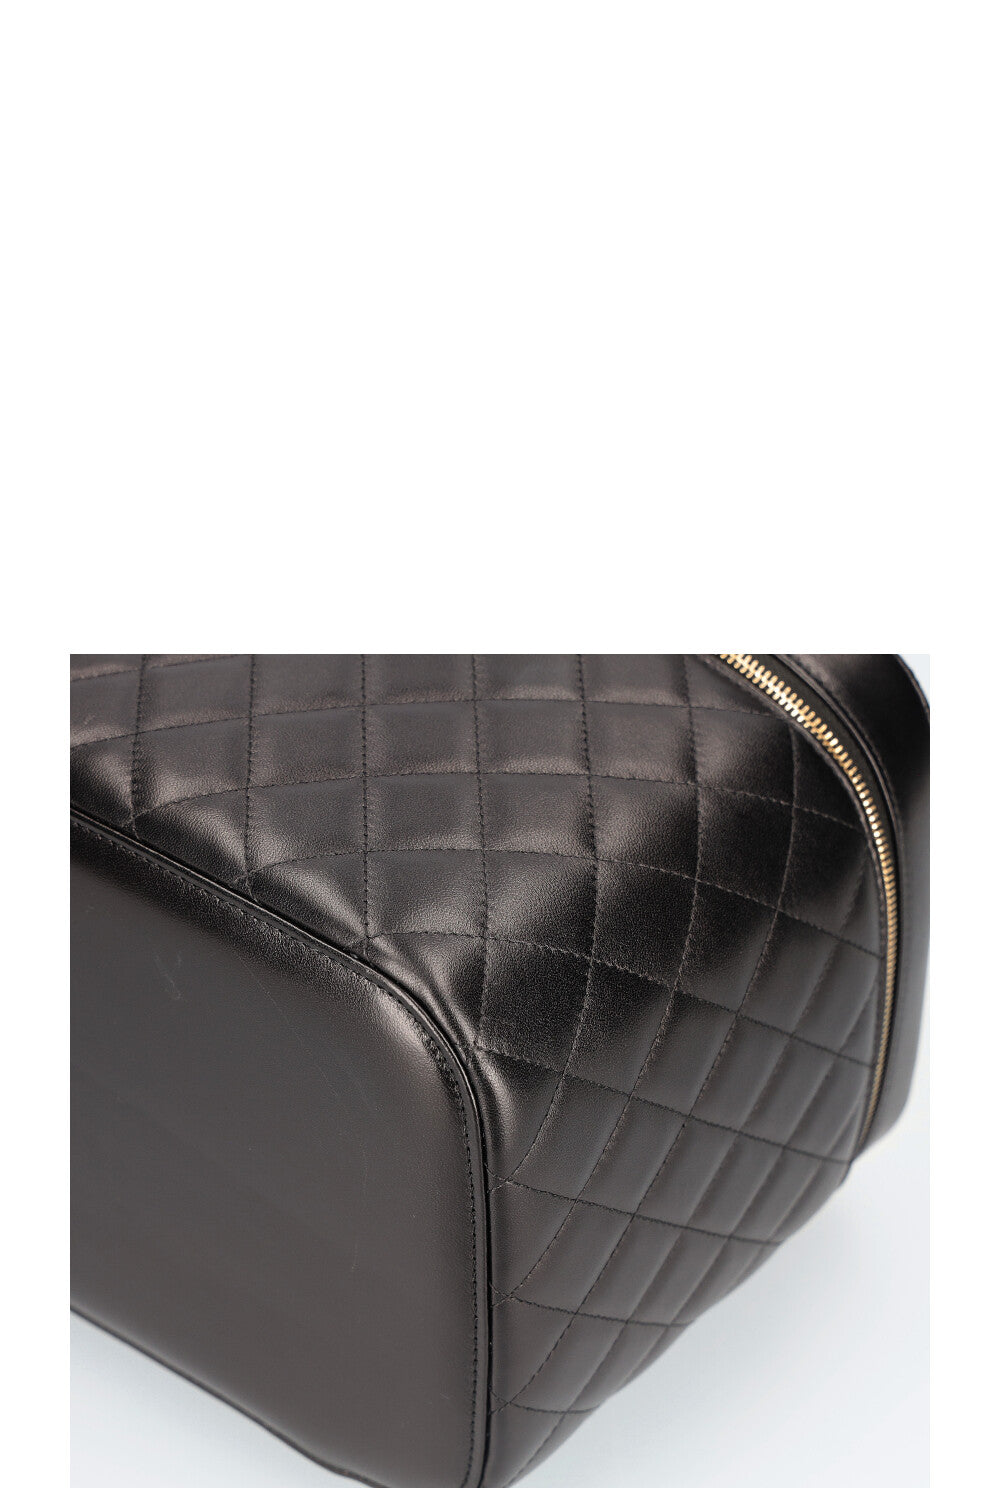 CHANEL Medium Beauty Case Quilted Lampskin Black